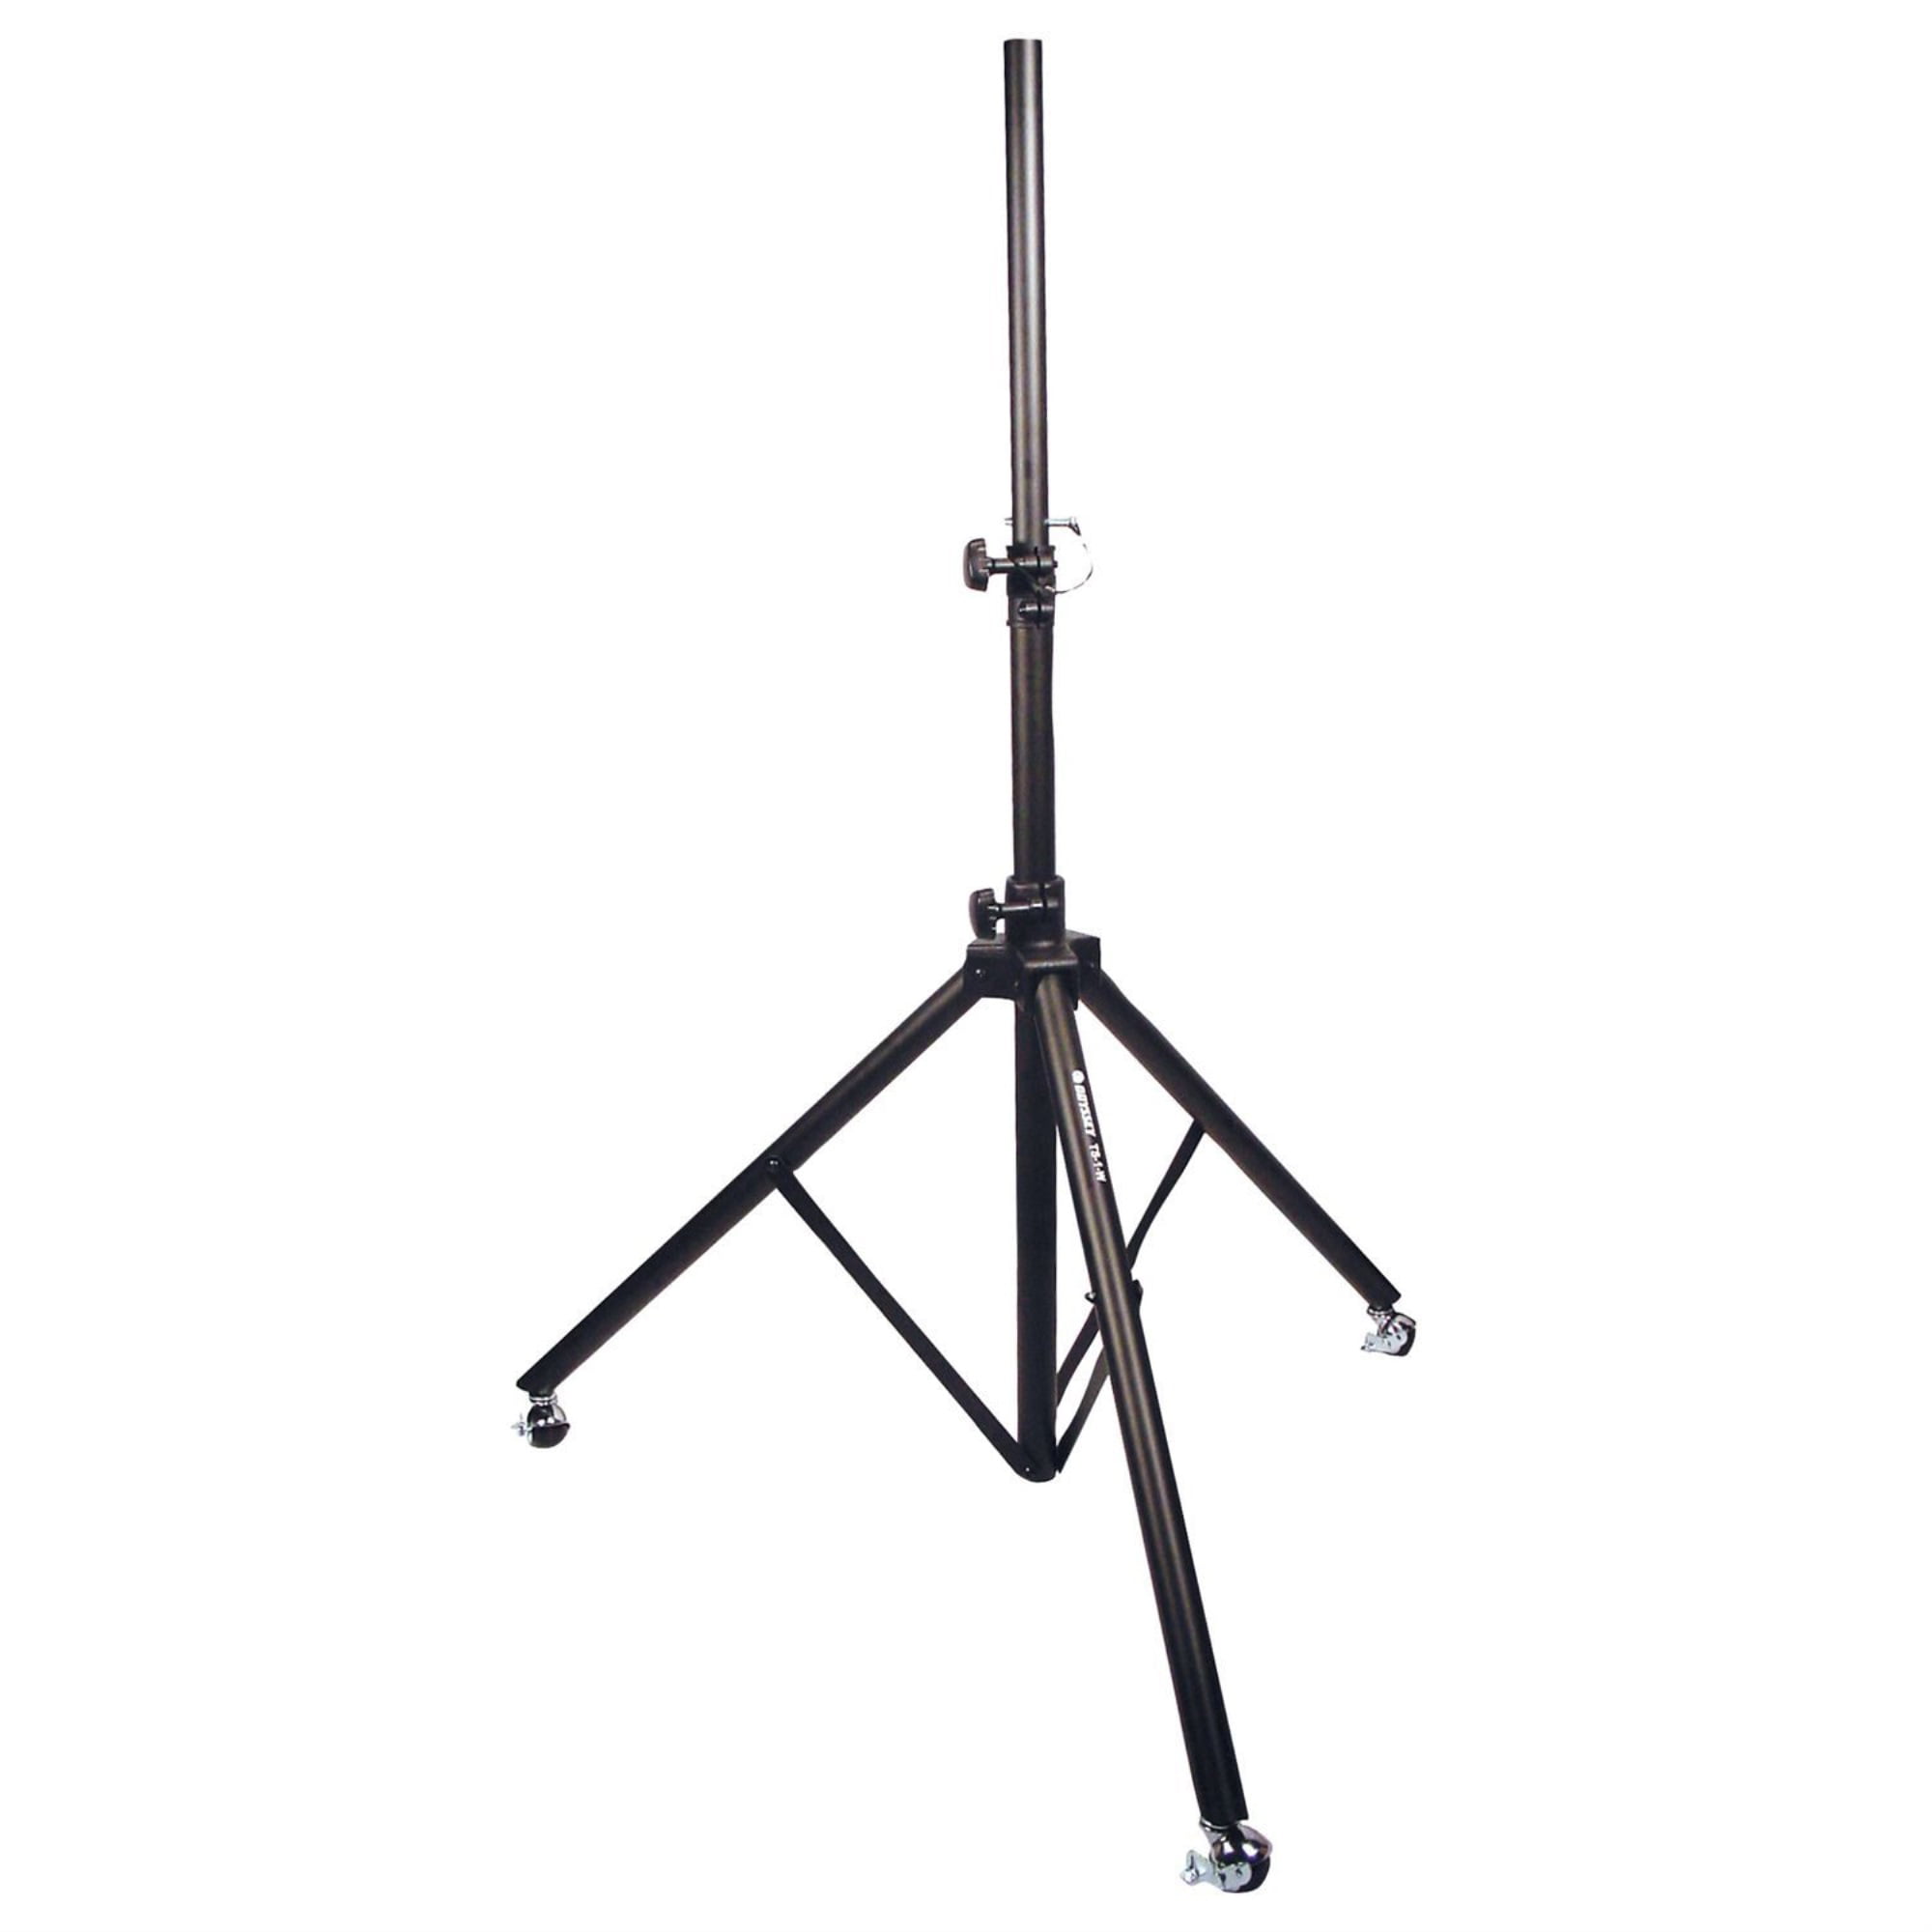 6' TRIPOD SPEAKER STAND WITH WHEELS AND BRAKES